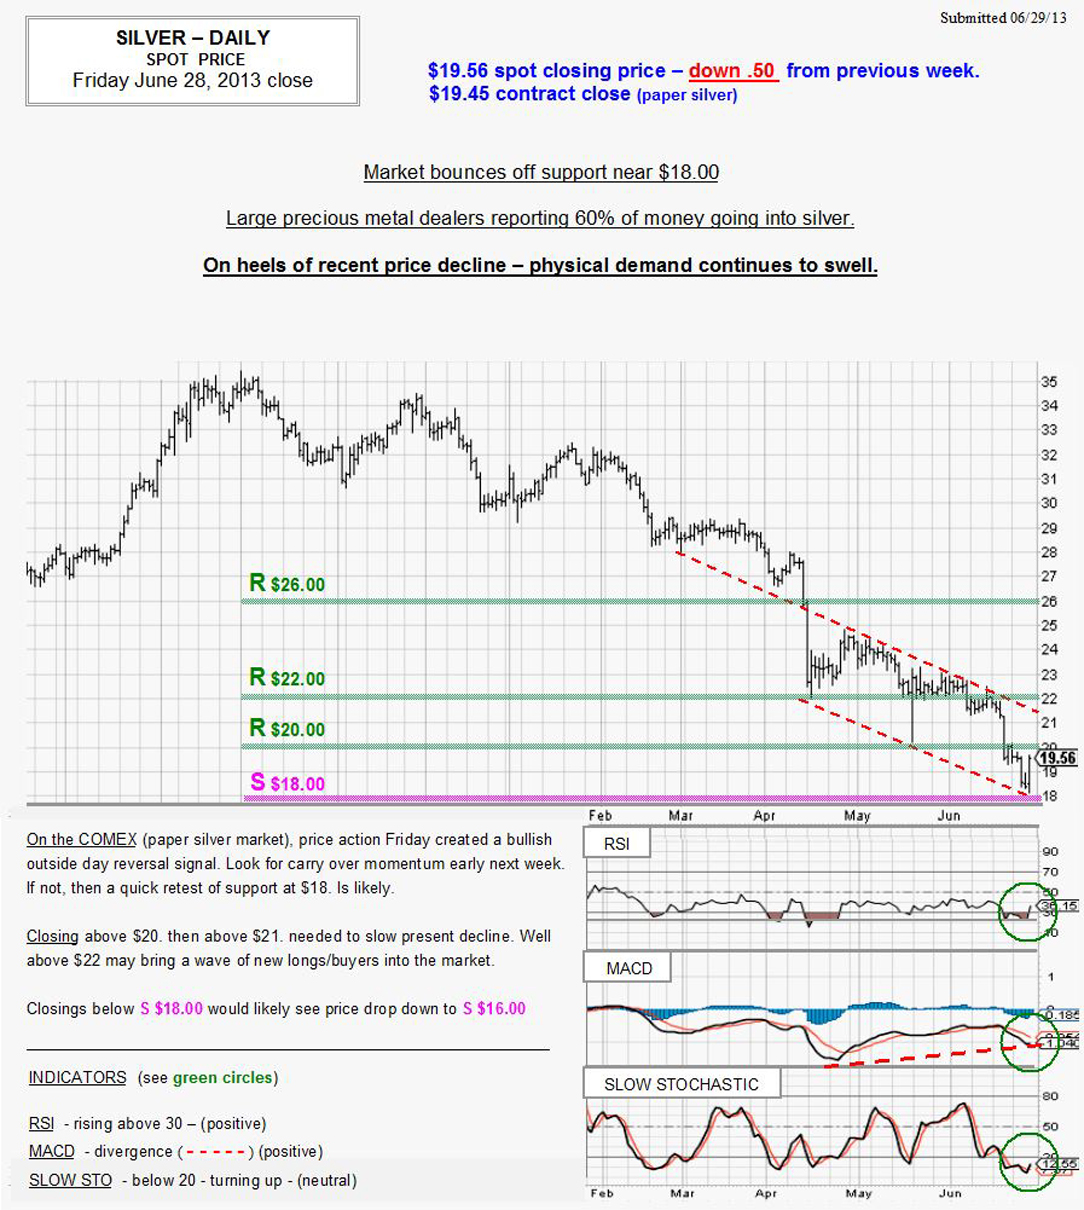 JUNE 28, 2013 chart & commentary